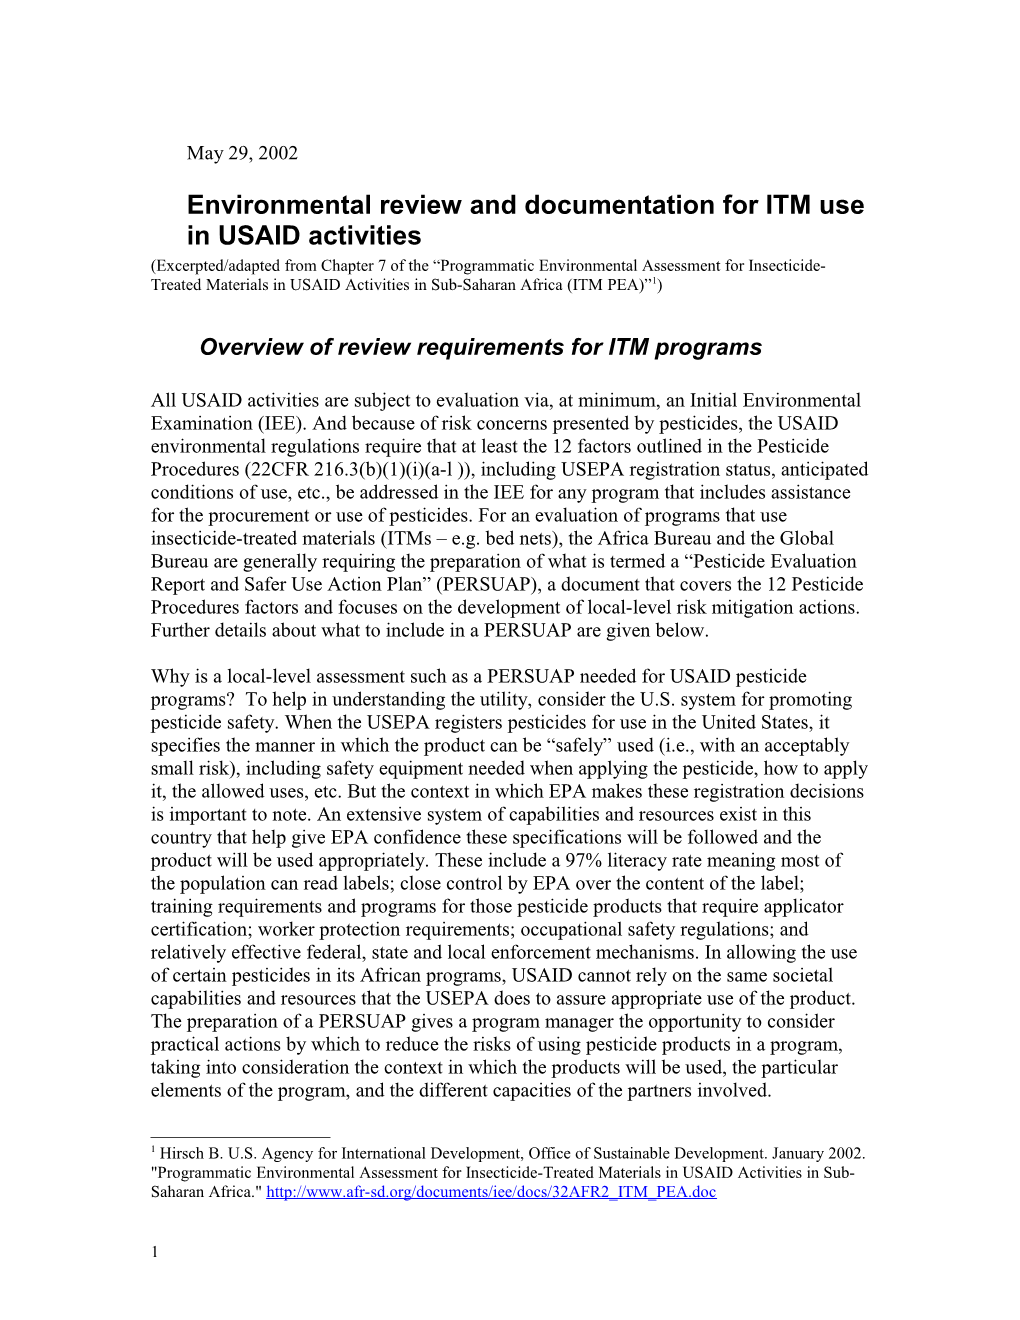 Environmental Review and Documentation for ITM Use in USAID Activities